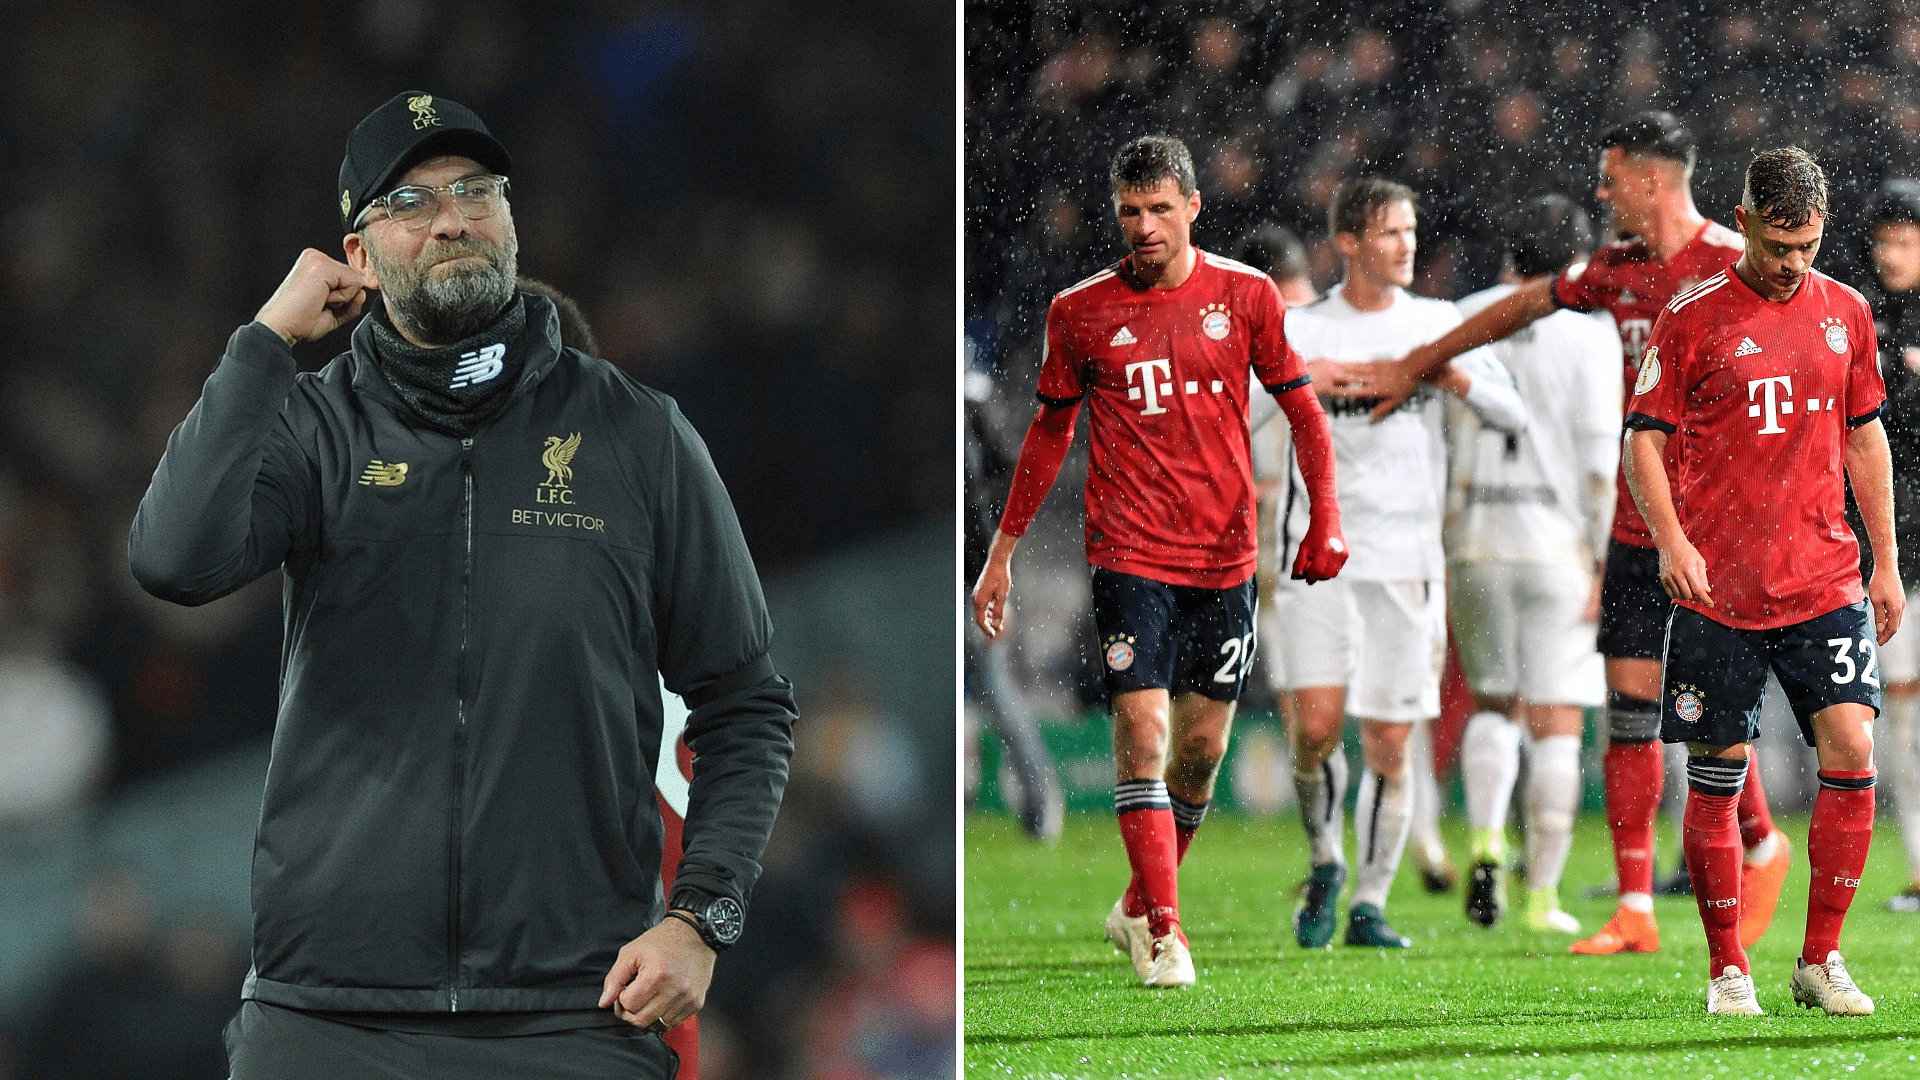 Jurgen Klopp’s Liverpool lock horns with Bayern Munich in the first leg of their UEFA Champions League round of 16 tie at Anfield.